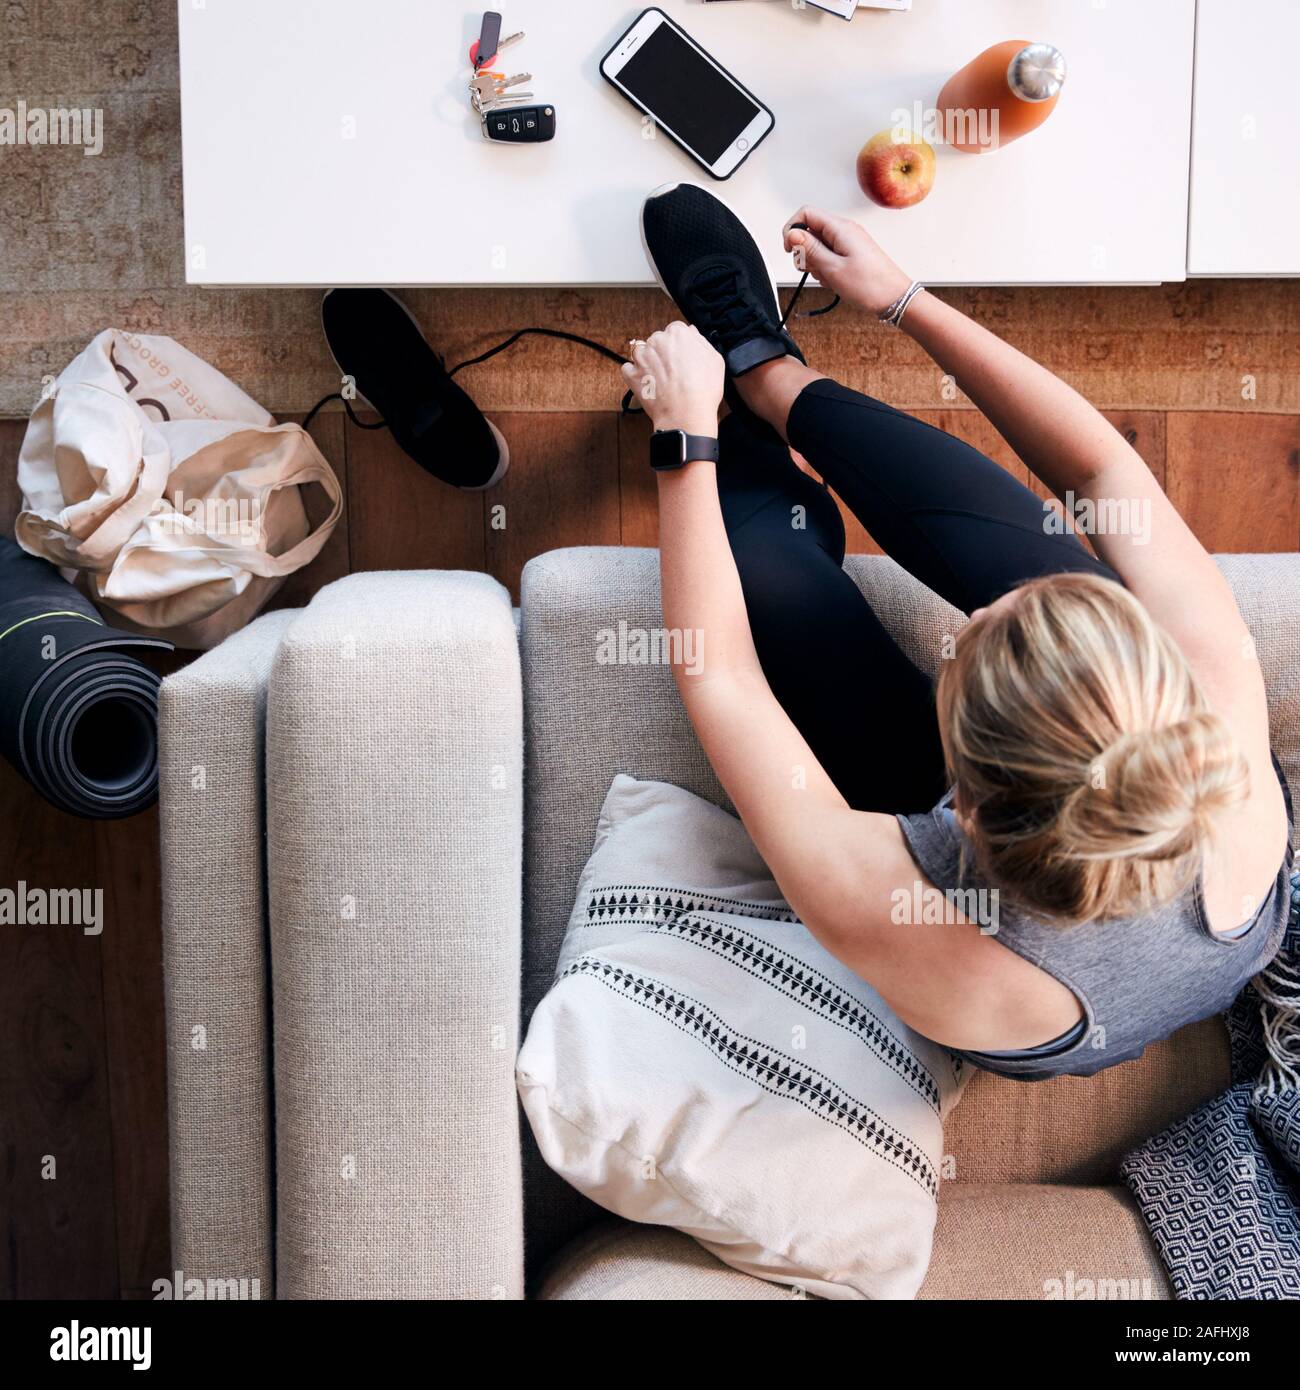 Overhead Shot Looking Down On Woman At Home Getting Ready To Go To Fitness Class Stock Photo